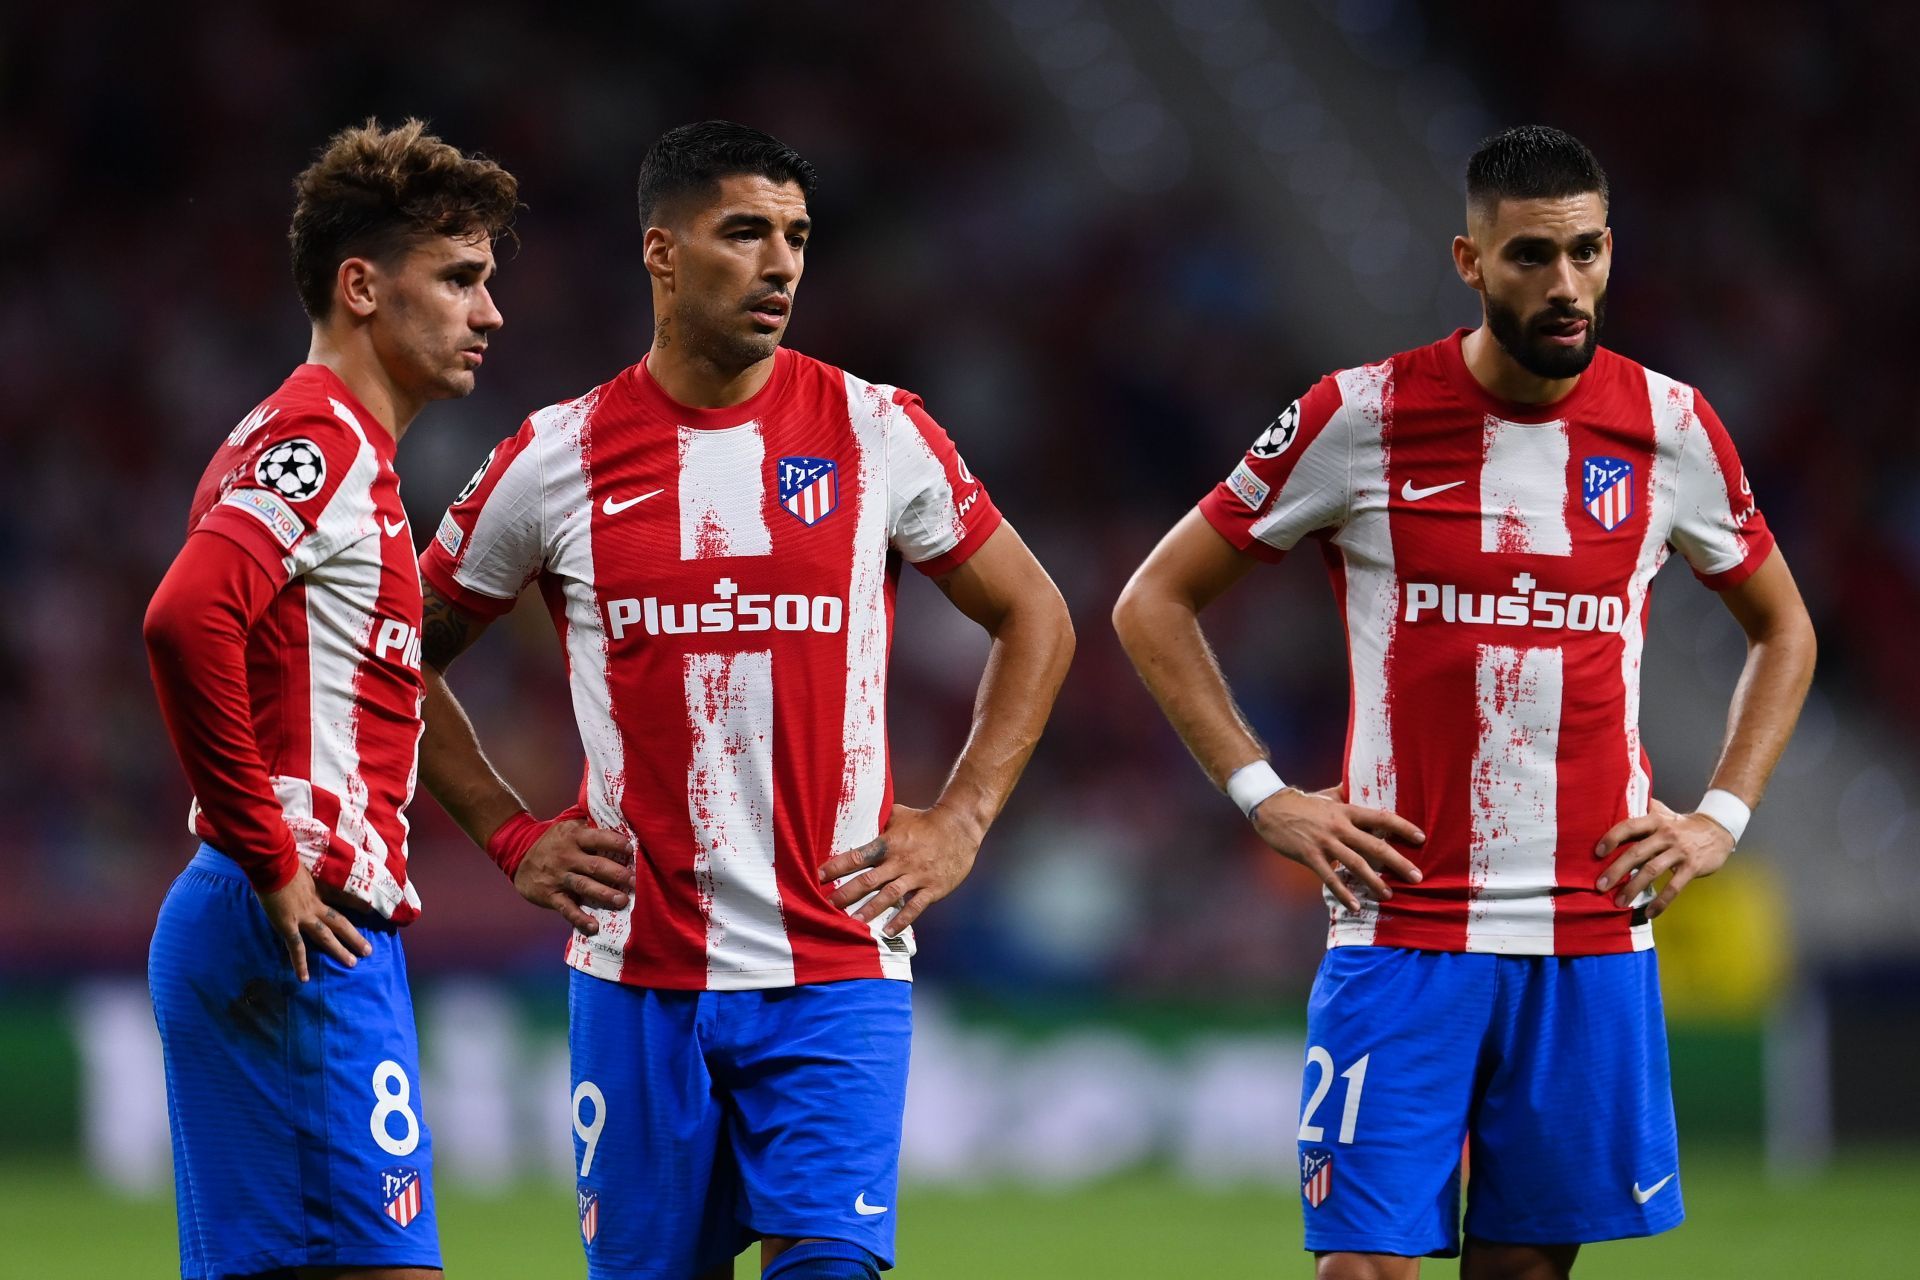 Atletico Madrid take on Mallorca this weekend